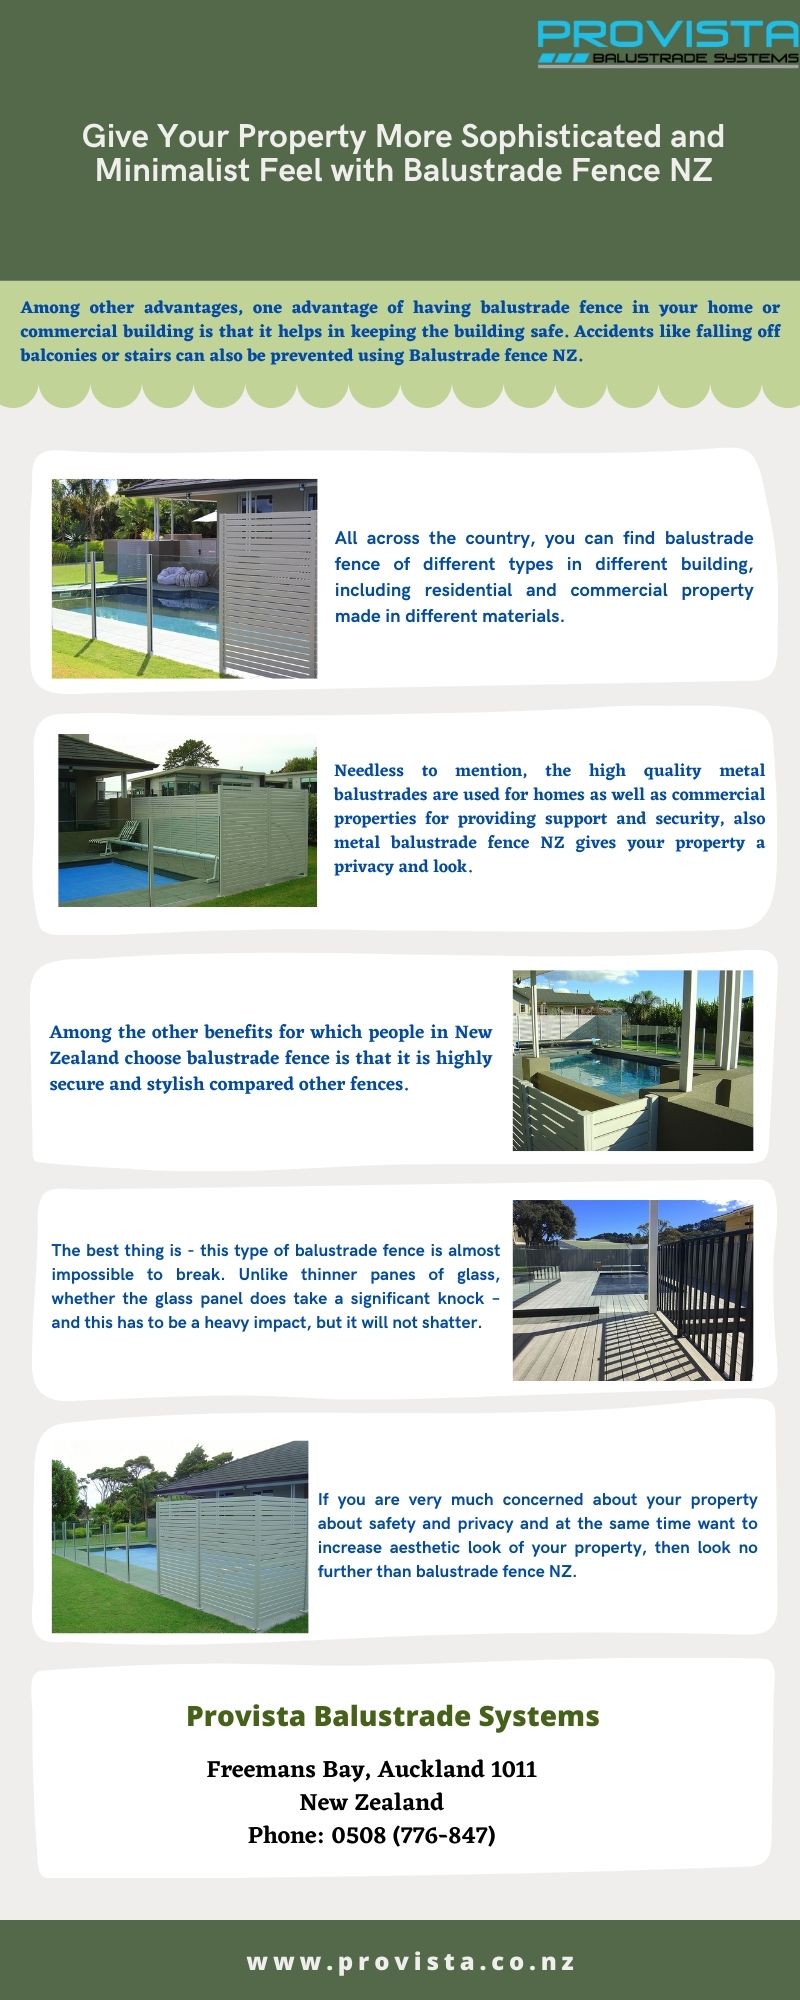 Give Your Property More Sophisticated and Minimalist Feel with Balustrade Fence NZ Balustrade fence are used in different ways in a property. Balustrade fence NZ can help maximize your space in compact areas, and at the same time it gives a modern look, privacy and safety in your property. For more details, visit: https://provista.co.nz by Provista